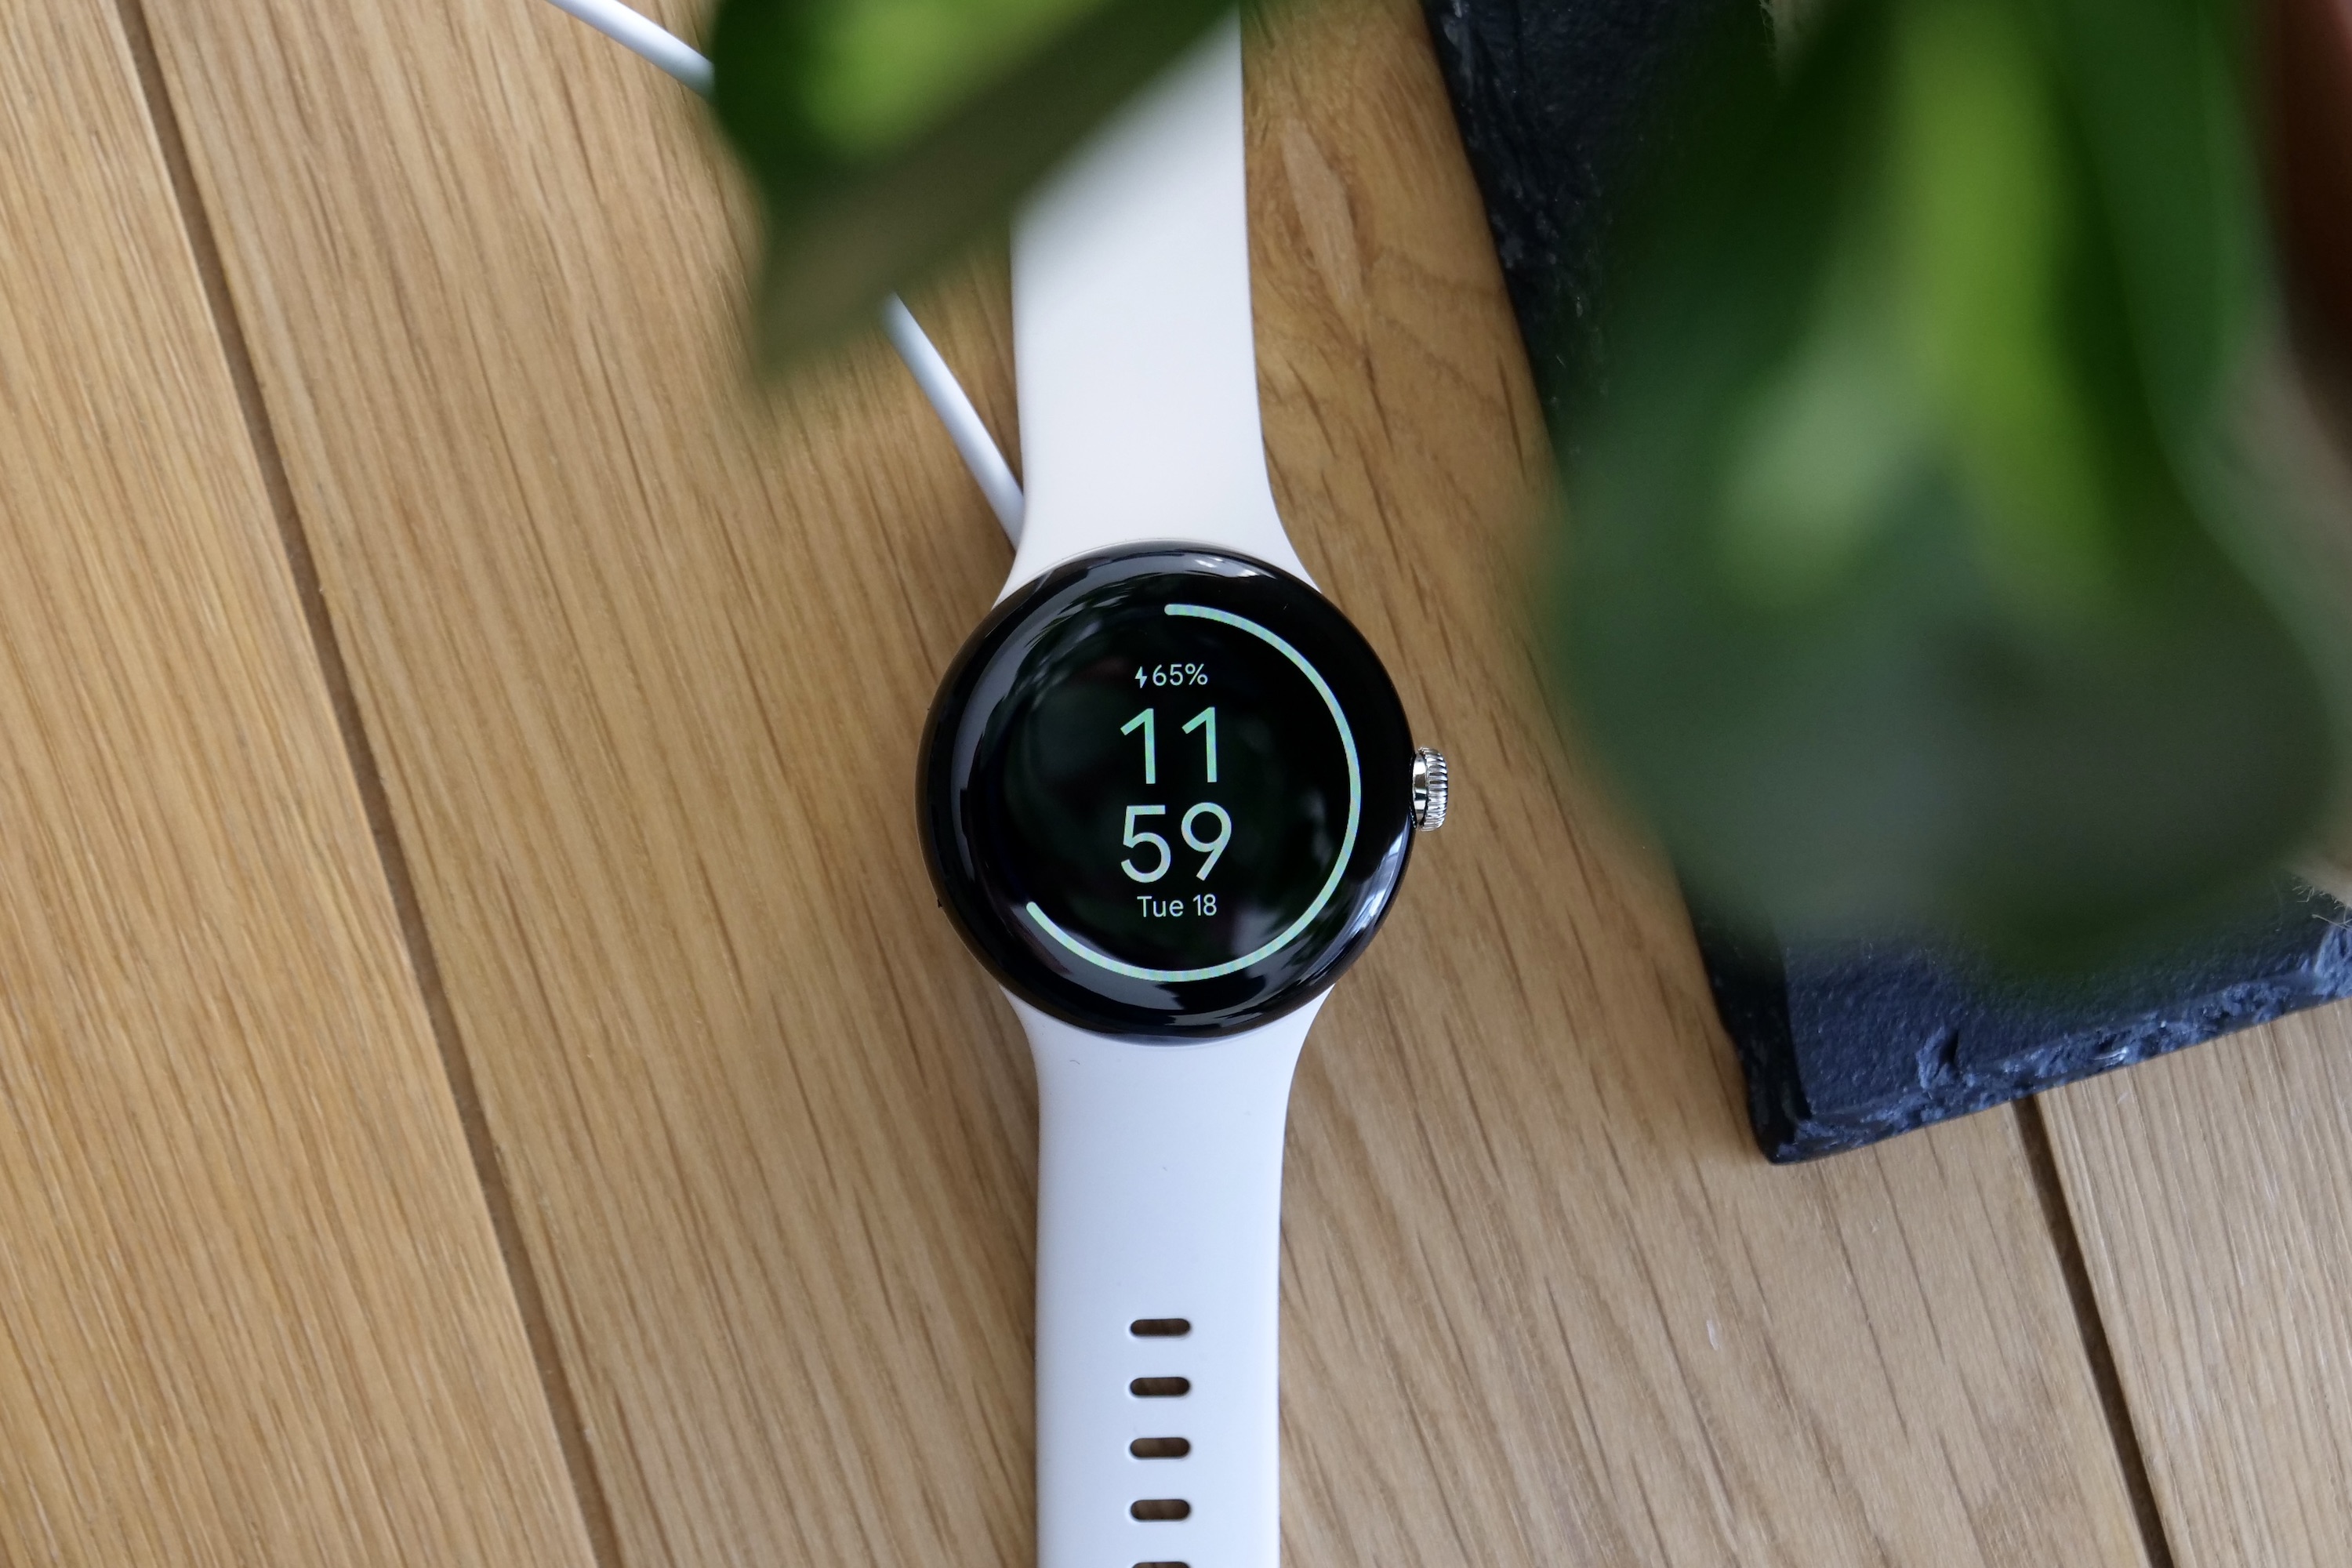 The Google Pixel Watch on charge.